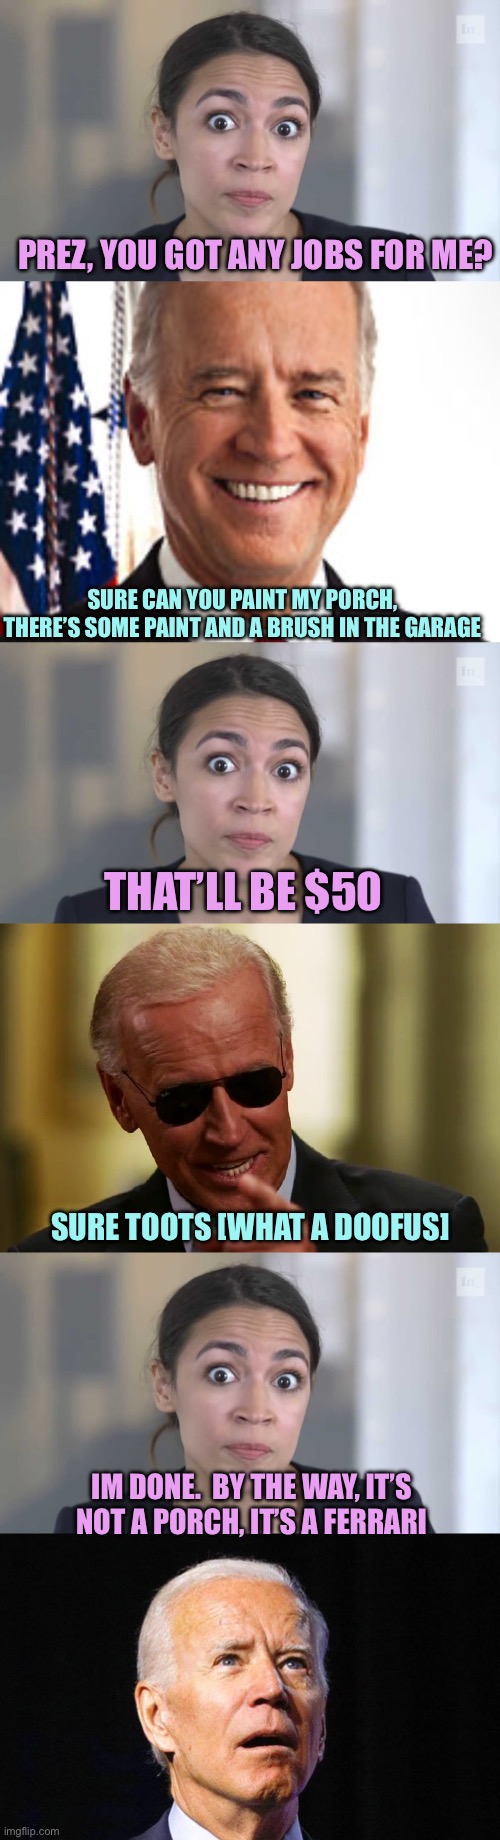 AOC handyman | PREZ, YOU GOT ANY JOBS FOR ME? SURE CAN YOU PAINT MY PORCH, THERE’S SOME PAINT AND A BRUSH IN THE GARAGE; THAT’LL BE $50; SURE TOOTS [WHAT A DOOFUS]; IM DONE.  BY THE WAY, IT’S NOT A PORCH, IT’S A FERRARI | image tagged in crazy alexandria ocasio-cortez,memes,joe biden,cool joe biden | made w/ Imgflip meme maker